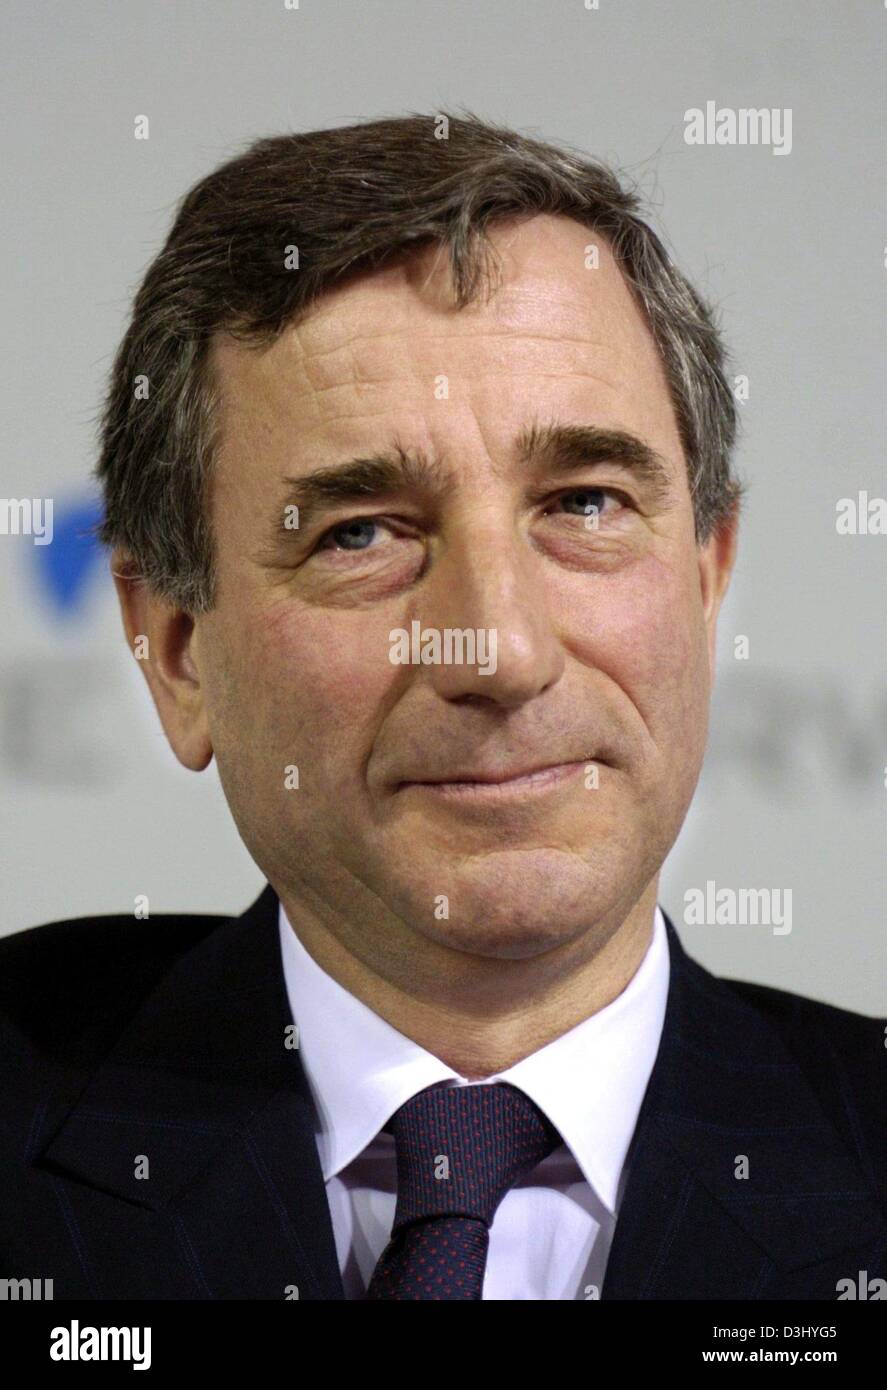 (dpa) - Harry Roels, chairman of German energy supplier RWE, smiles during the balance press conference in Essen, Germany, 26 February 2004. Stock Photo